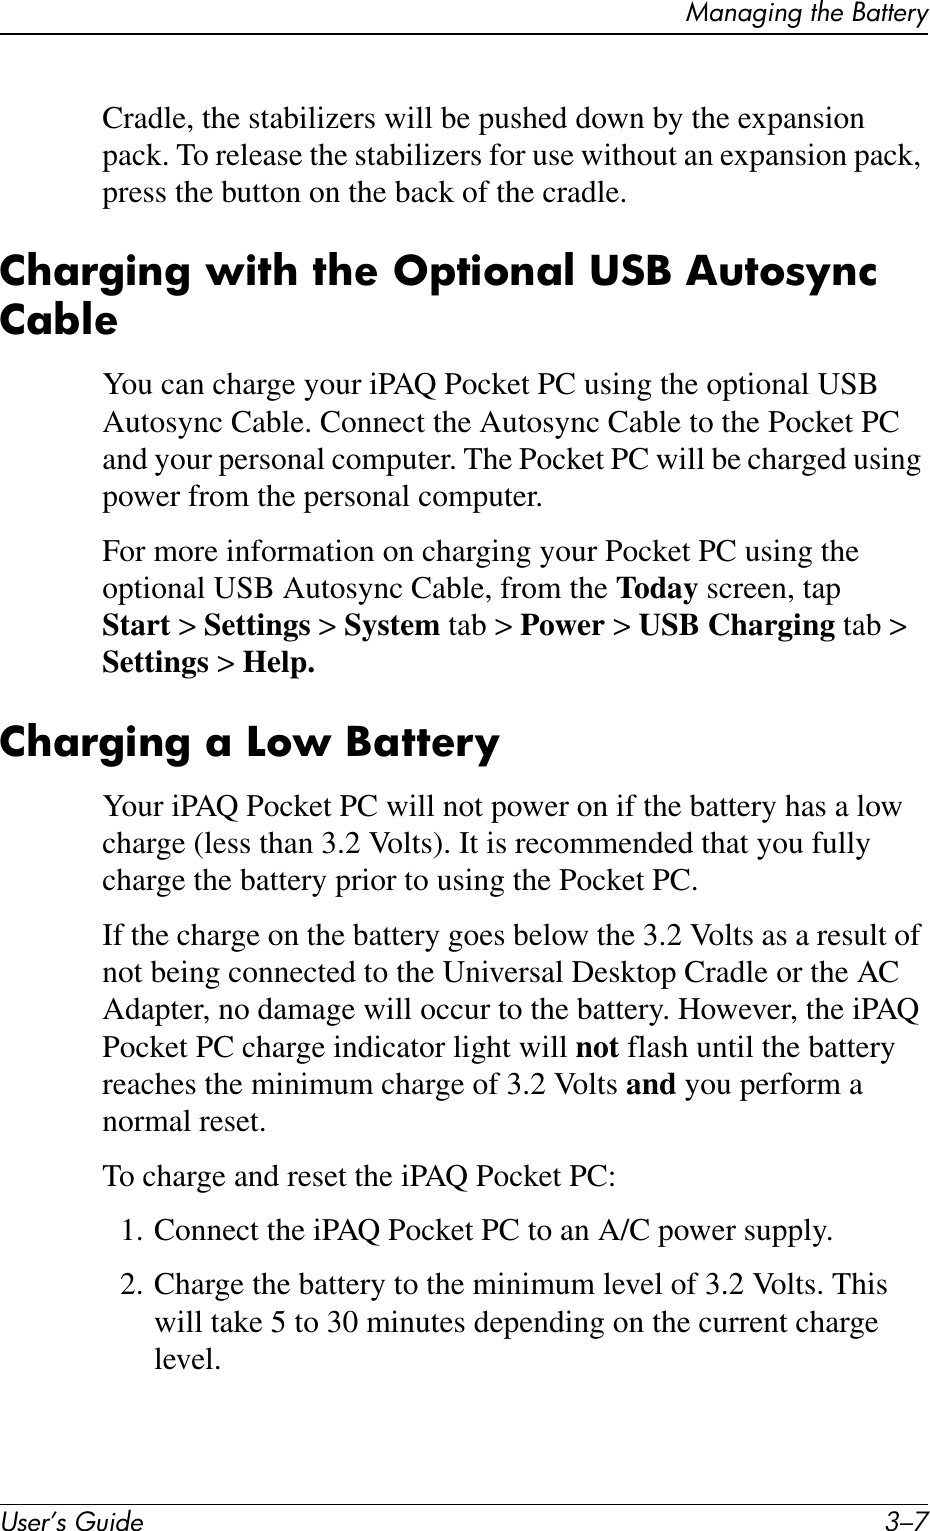 Managing the BatteryUser’s Guide 3–7Cradle, the stabilizers will be pushed down by the expansion pack. To release the stabilizers for use without an expansion pack, press the button on the back of the cradle.Charging with the Optional USB Autosync CableYou can charge your iPAQ Pocket PC using the optional USB Autosync Cable. Connect the Autosync Cable to the Pocket PC and your personal computer. The Pocket PC will be charged using power from the personal computer.For more information on charging your Pocket PC using the optional USB Autosync Cable, from the Today screen, tap Start &gt; Settings &gt; System tab &gt; Power &gt; USB Charging tab &gt; Settings &gt; Help.Charging a Low BatteryYour iPAQ Pocket PC will not power on if the battery has a low charge (less than 3.2 Volts). It is recommended that you fully charge the battery prior to using the Pocket PC.If the charge on the battery goes below the 3.2 Volts as a result of not being connected to the Universal Desktop Cradle or the AC Adapter, no damage will occur to the battery. However, the iPAQ Pocket PC charge indicator light will not flash until the battery reaches the minimum charge of 3.2 Volts and you perform a normal reset.To charge and reset the iPAQ Pocket PC:1. Connect the iPAQ Pocket PC to an A/C power supply.2. Charge the battery to the minimum level of 3.2 Volts. This will take 5 to 30 minutes depending on the current charge level.